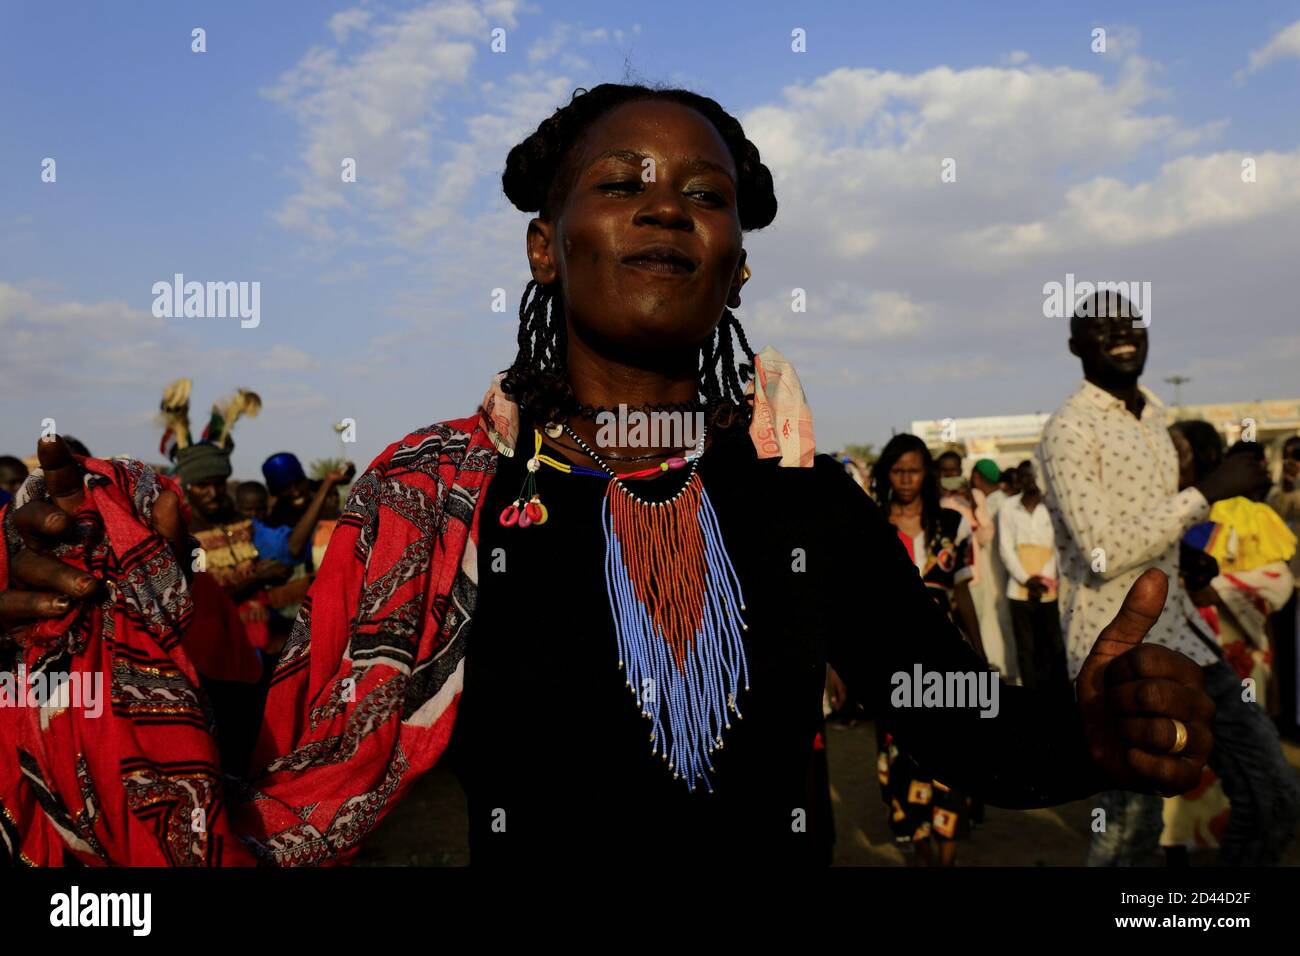 Khartoum, Khartoum. 8th Oct, 2020. Sudanese attend a celebration ceremony upon the arrival of representatives of Sudanese government and armed groups who signed a final peace deal in Juba to end their armed conflicts, in Khartoum, Sudan on Oct. 8, 2020. Credit: Mohamed Khidir/Xinhua/Alamy Live News Stock Photo